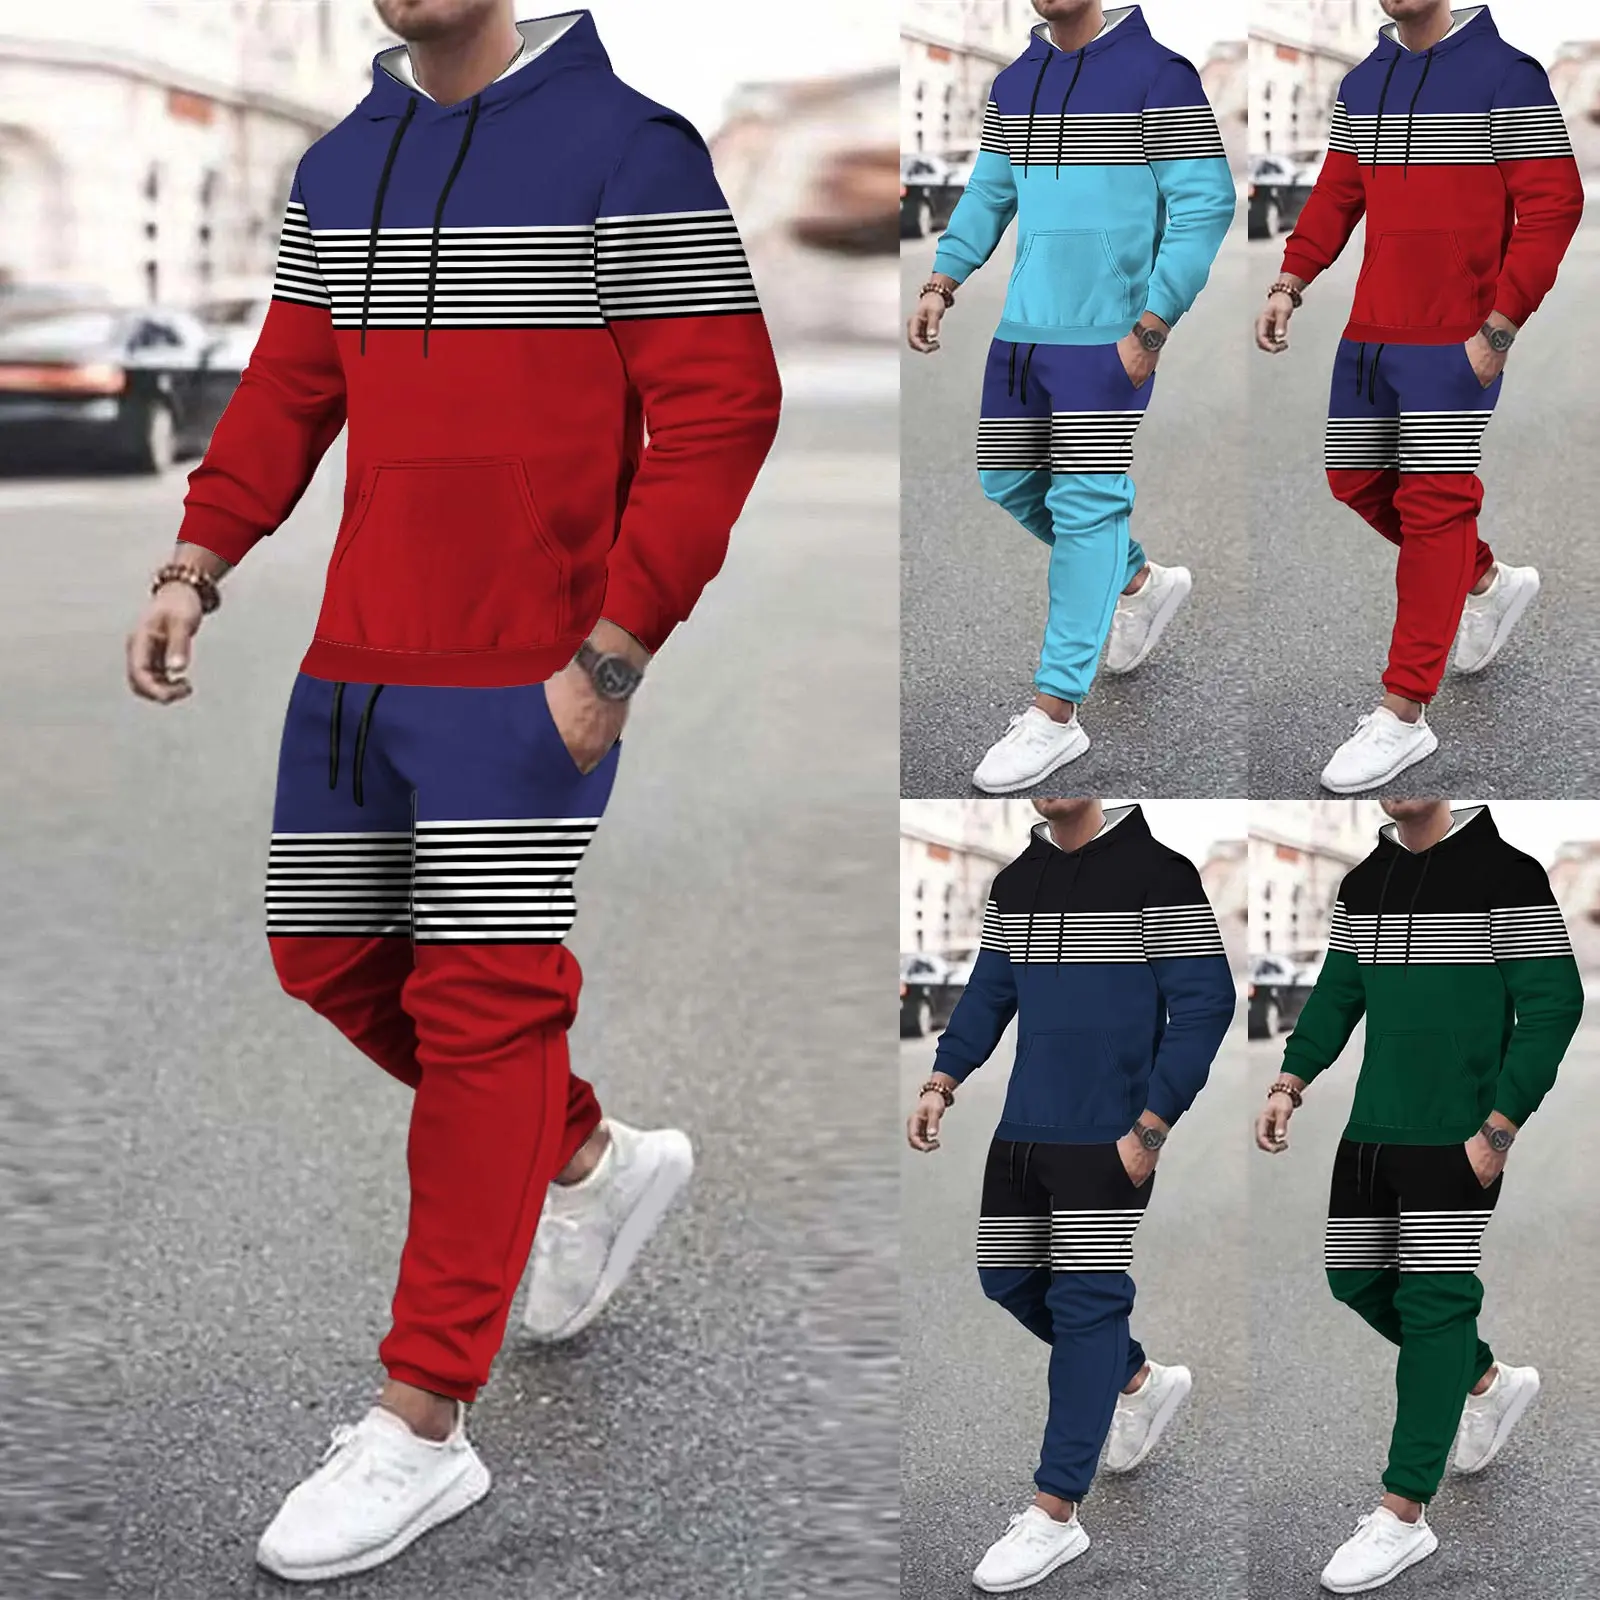 Striped print Hot Sale Mens New Tracksuit Hoodies and Trousers High Quality Male Dialy Casual Sports Jogging Set Autumn Outfits leopard print hot sale mens new tracksuit hoodies and trousers high quality male dialy casual sports jogging set autumn outfits